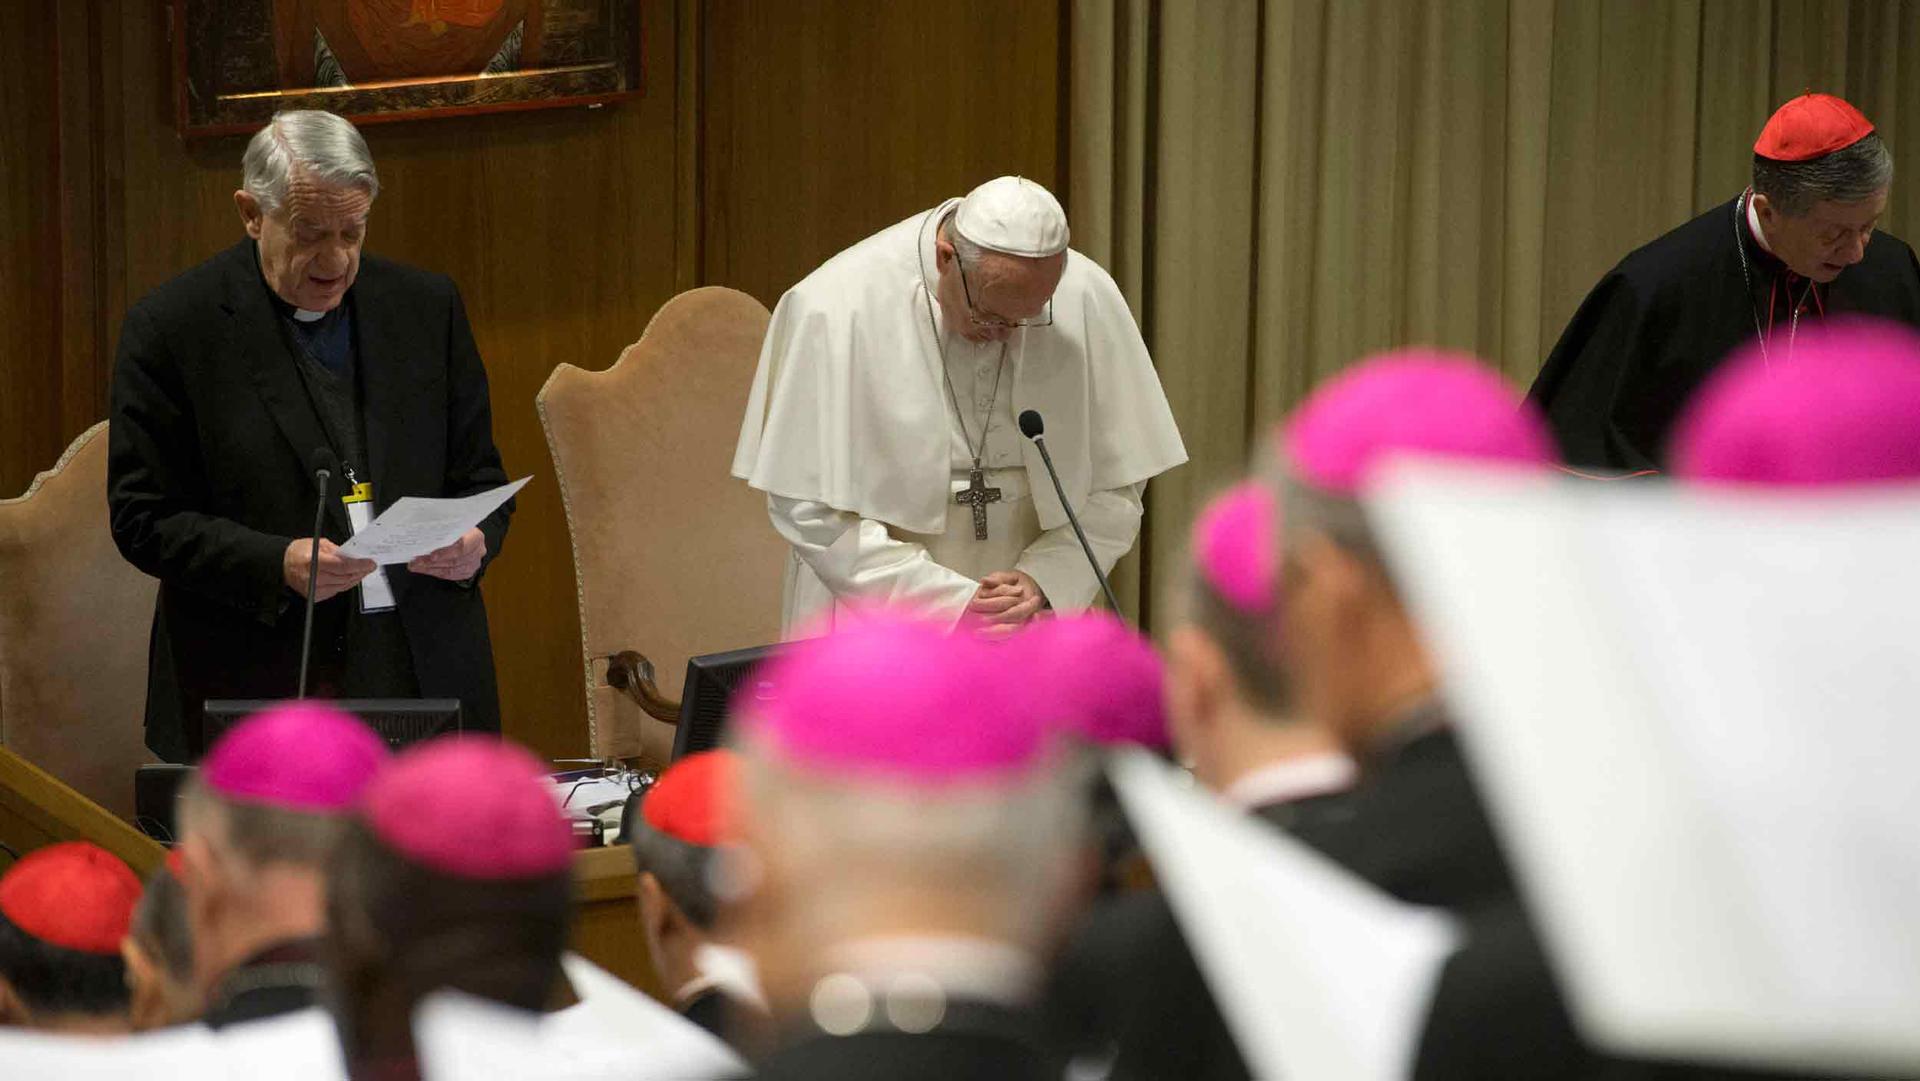 Pope Francis bows his head in prayer. Around him are other members of the clergy wearing red caps